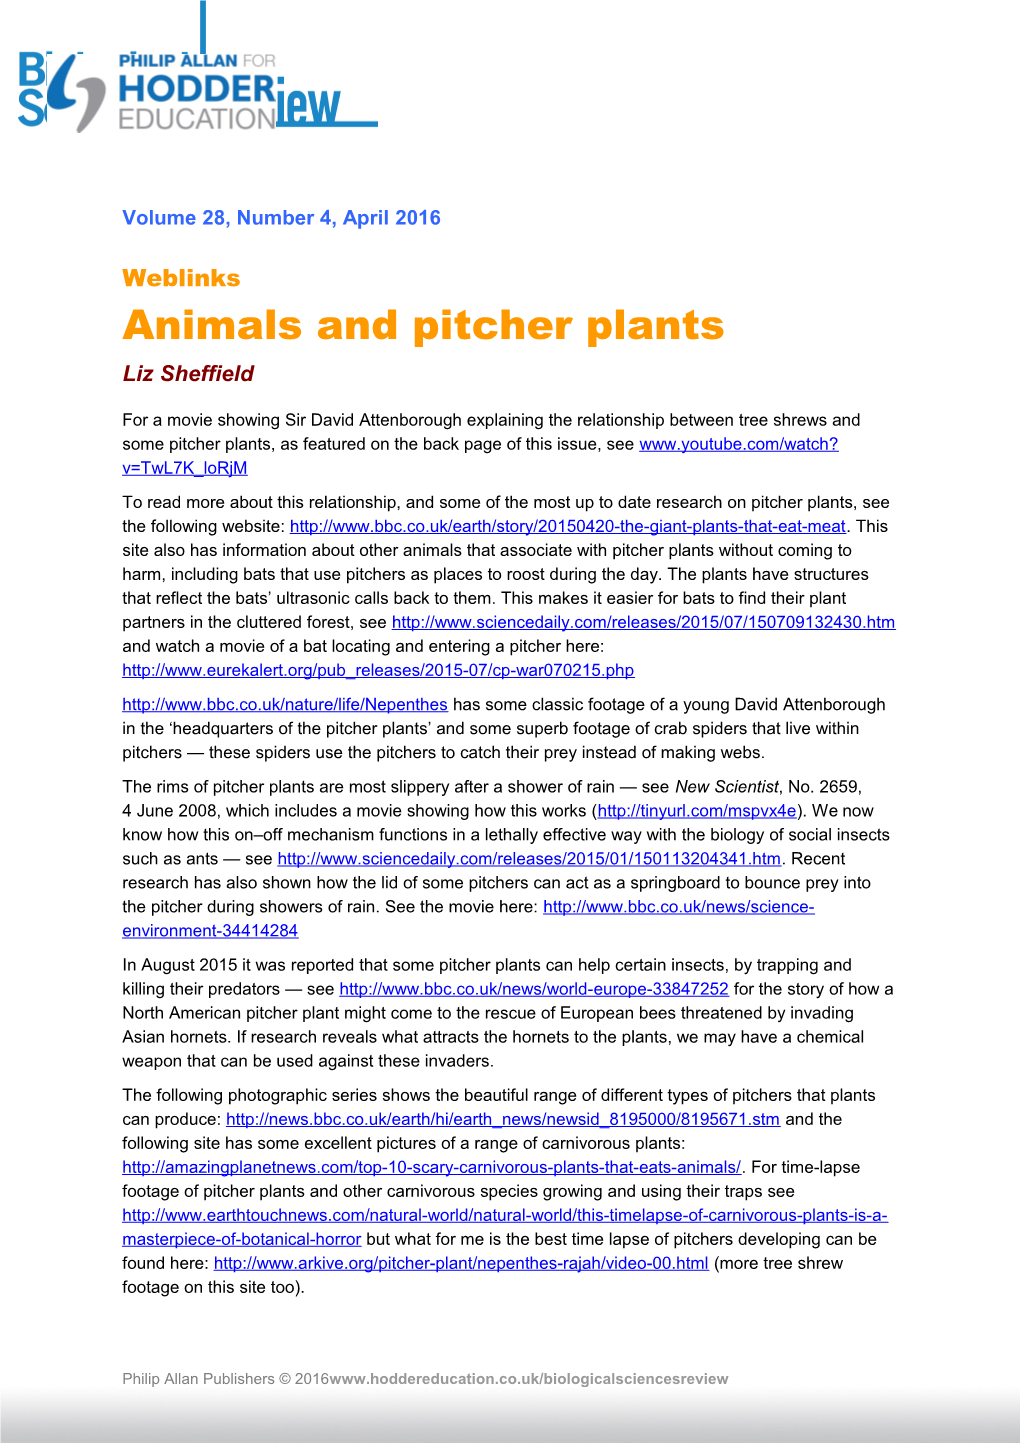 Animals and Pitcher Plants